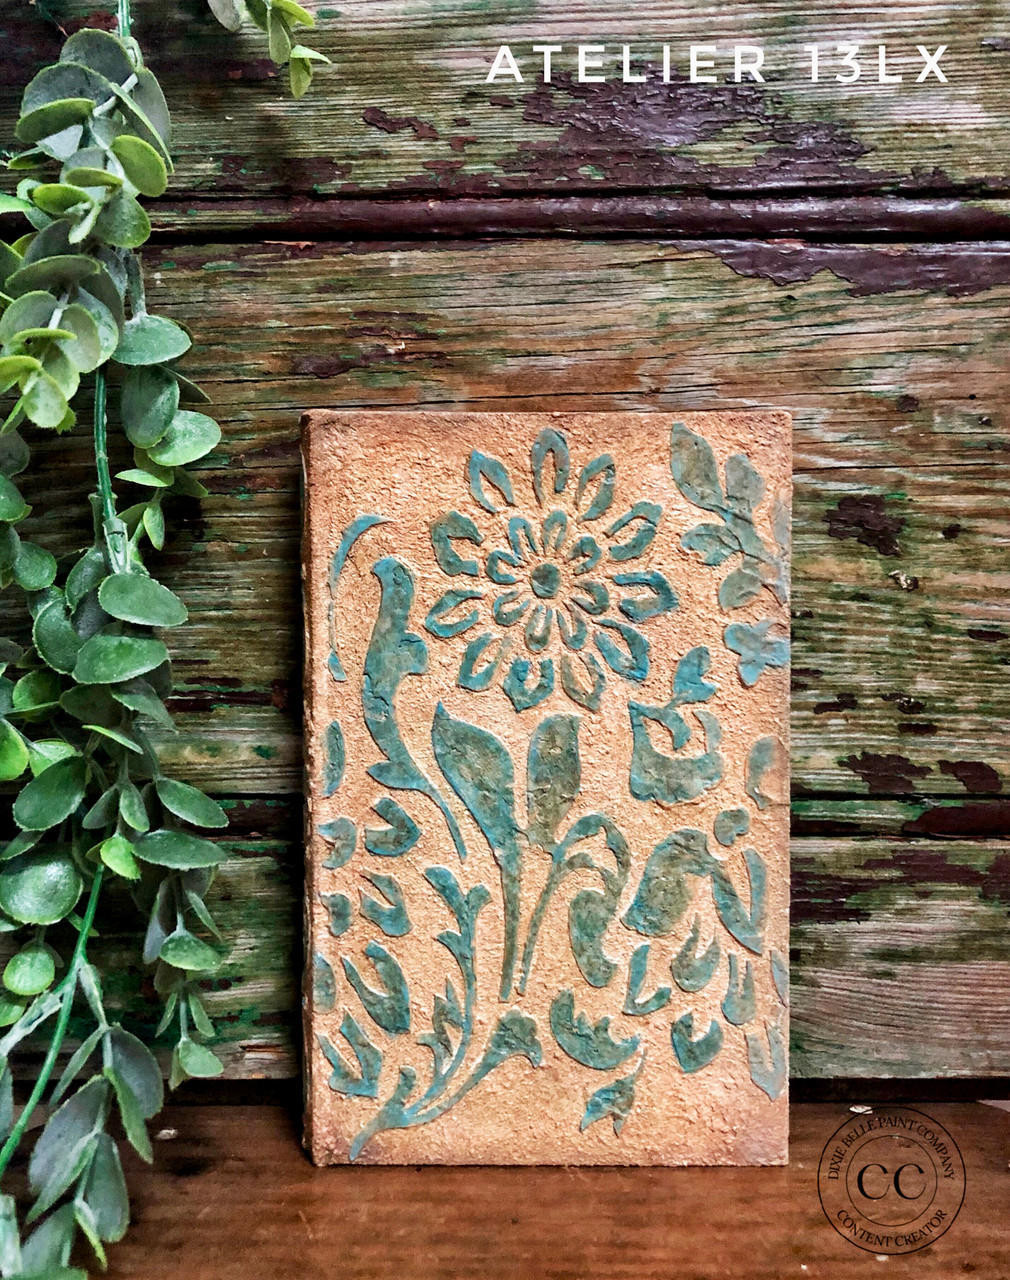 How to Stencil: Create a DIY Raised Carved Wood Effect with Stencils